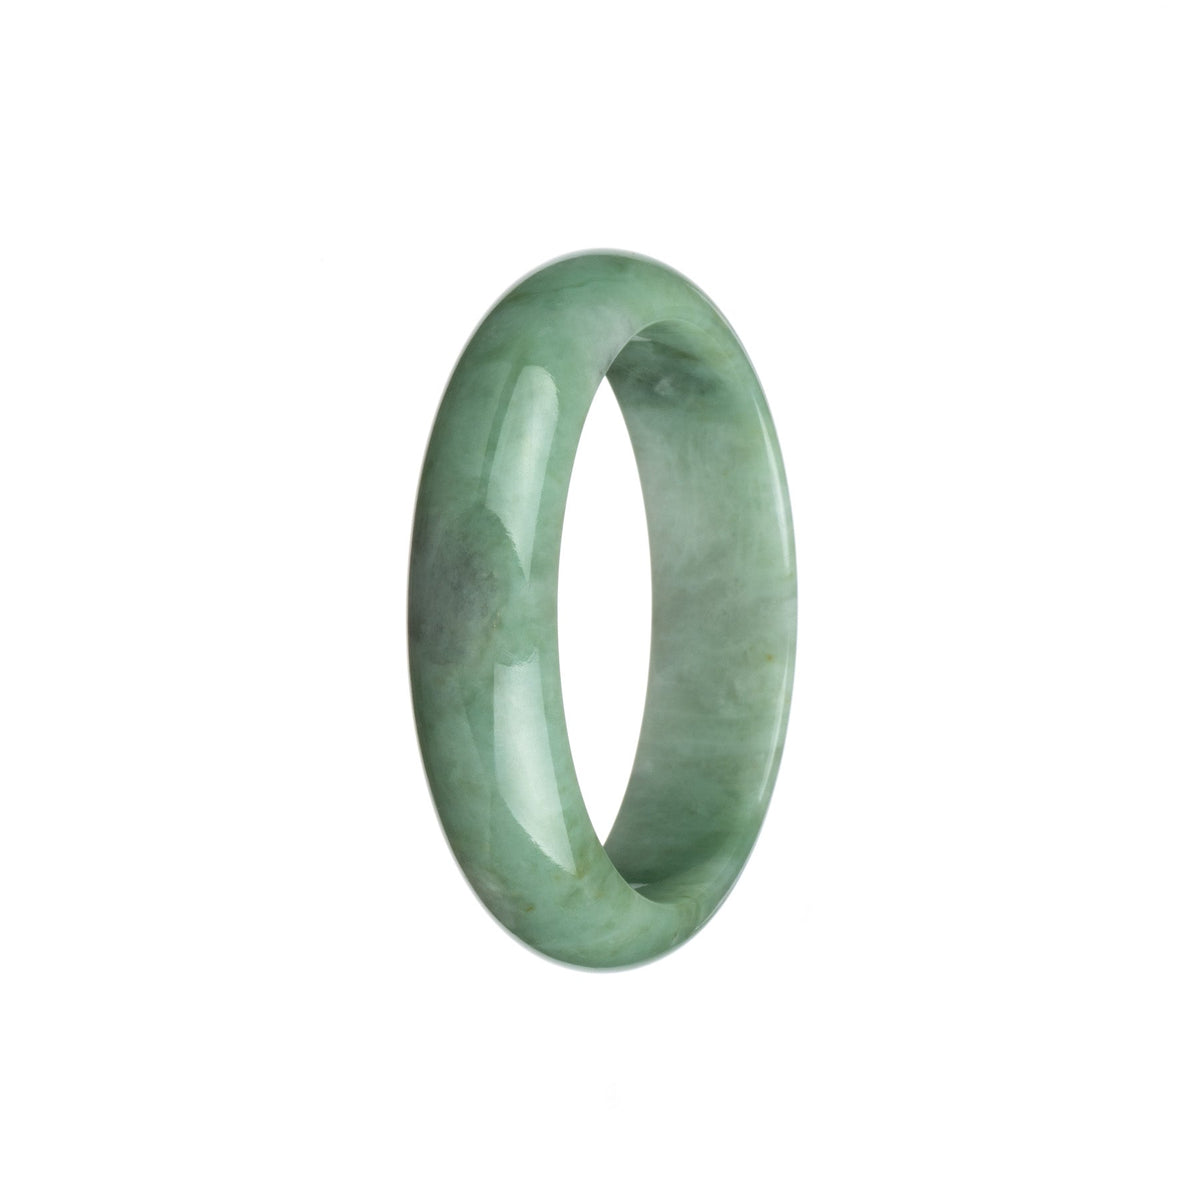 Certified Untreated Green and White Pattern Traditional Jade Bangle - 54mm Half Moon